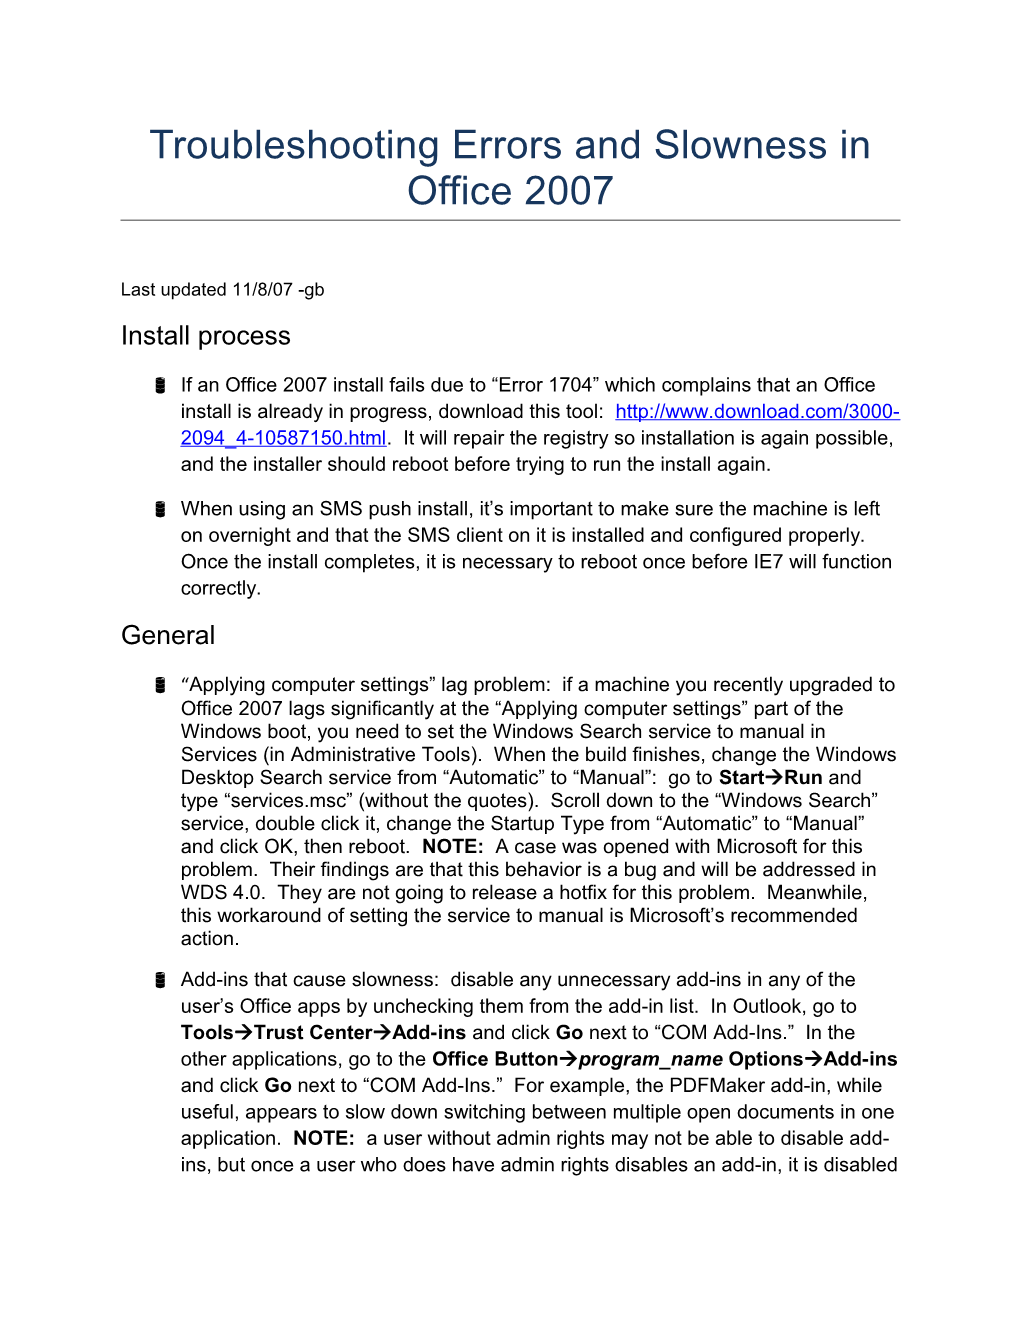 Troubleshooting Errors and Slowness in Office 2007